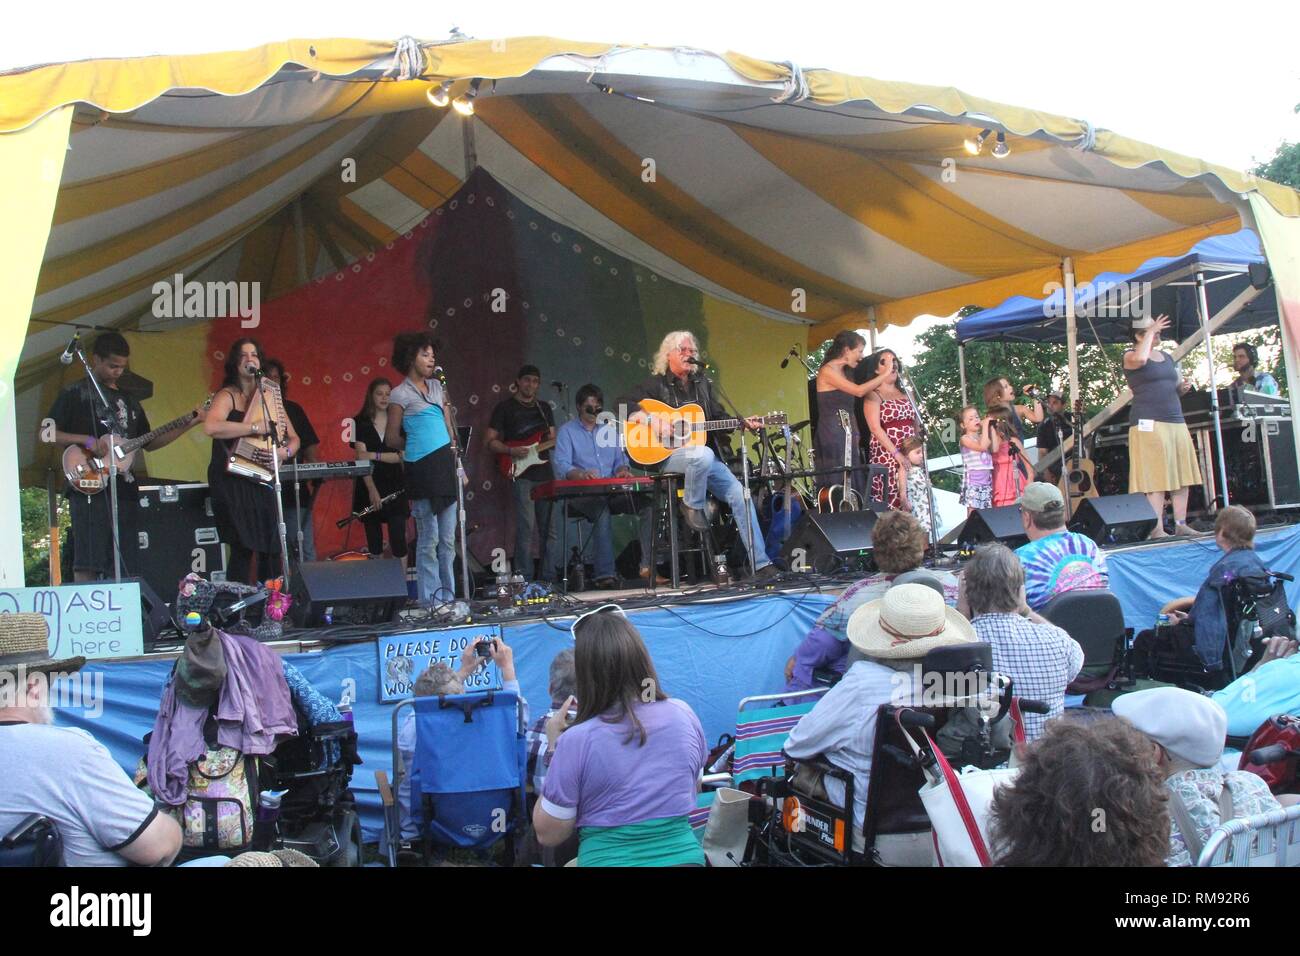 Arlo Guthrie & the Family Band are shown performing together on stage. Stock Photo